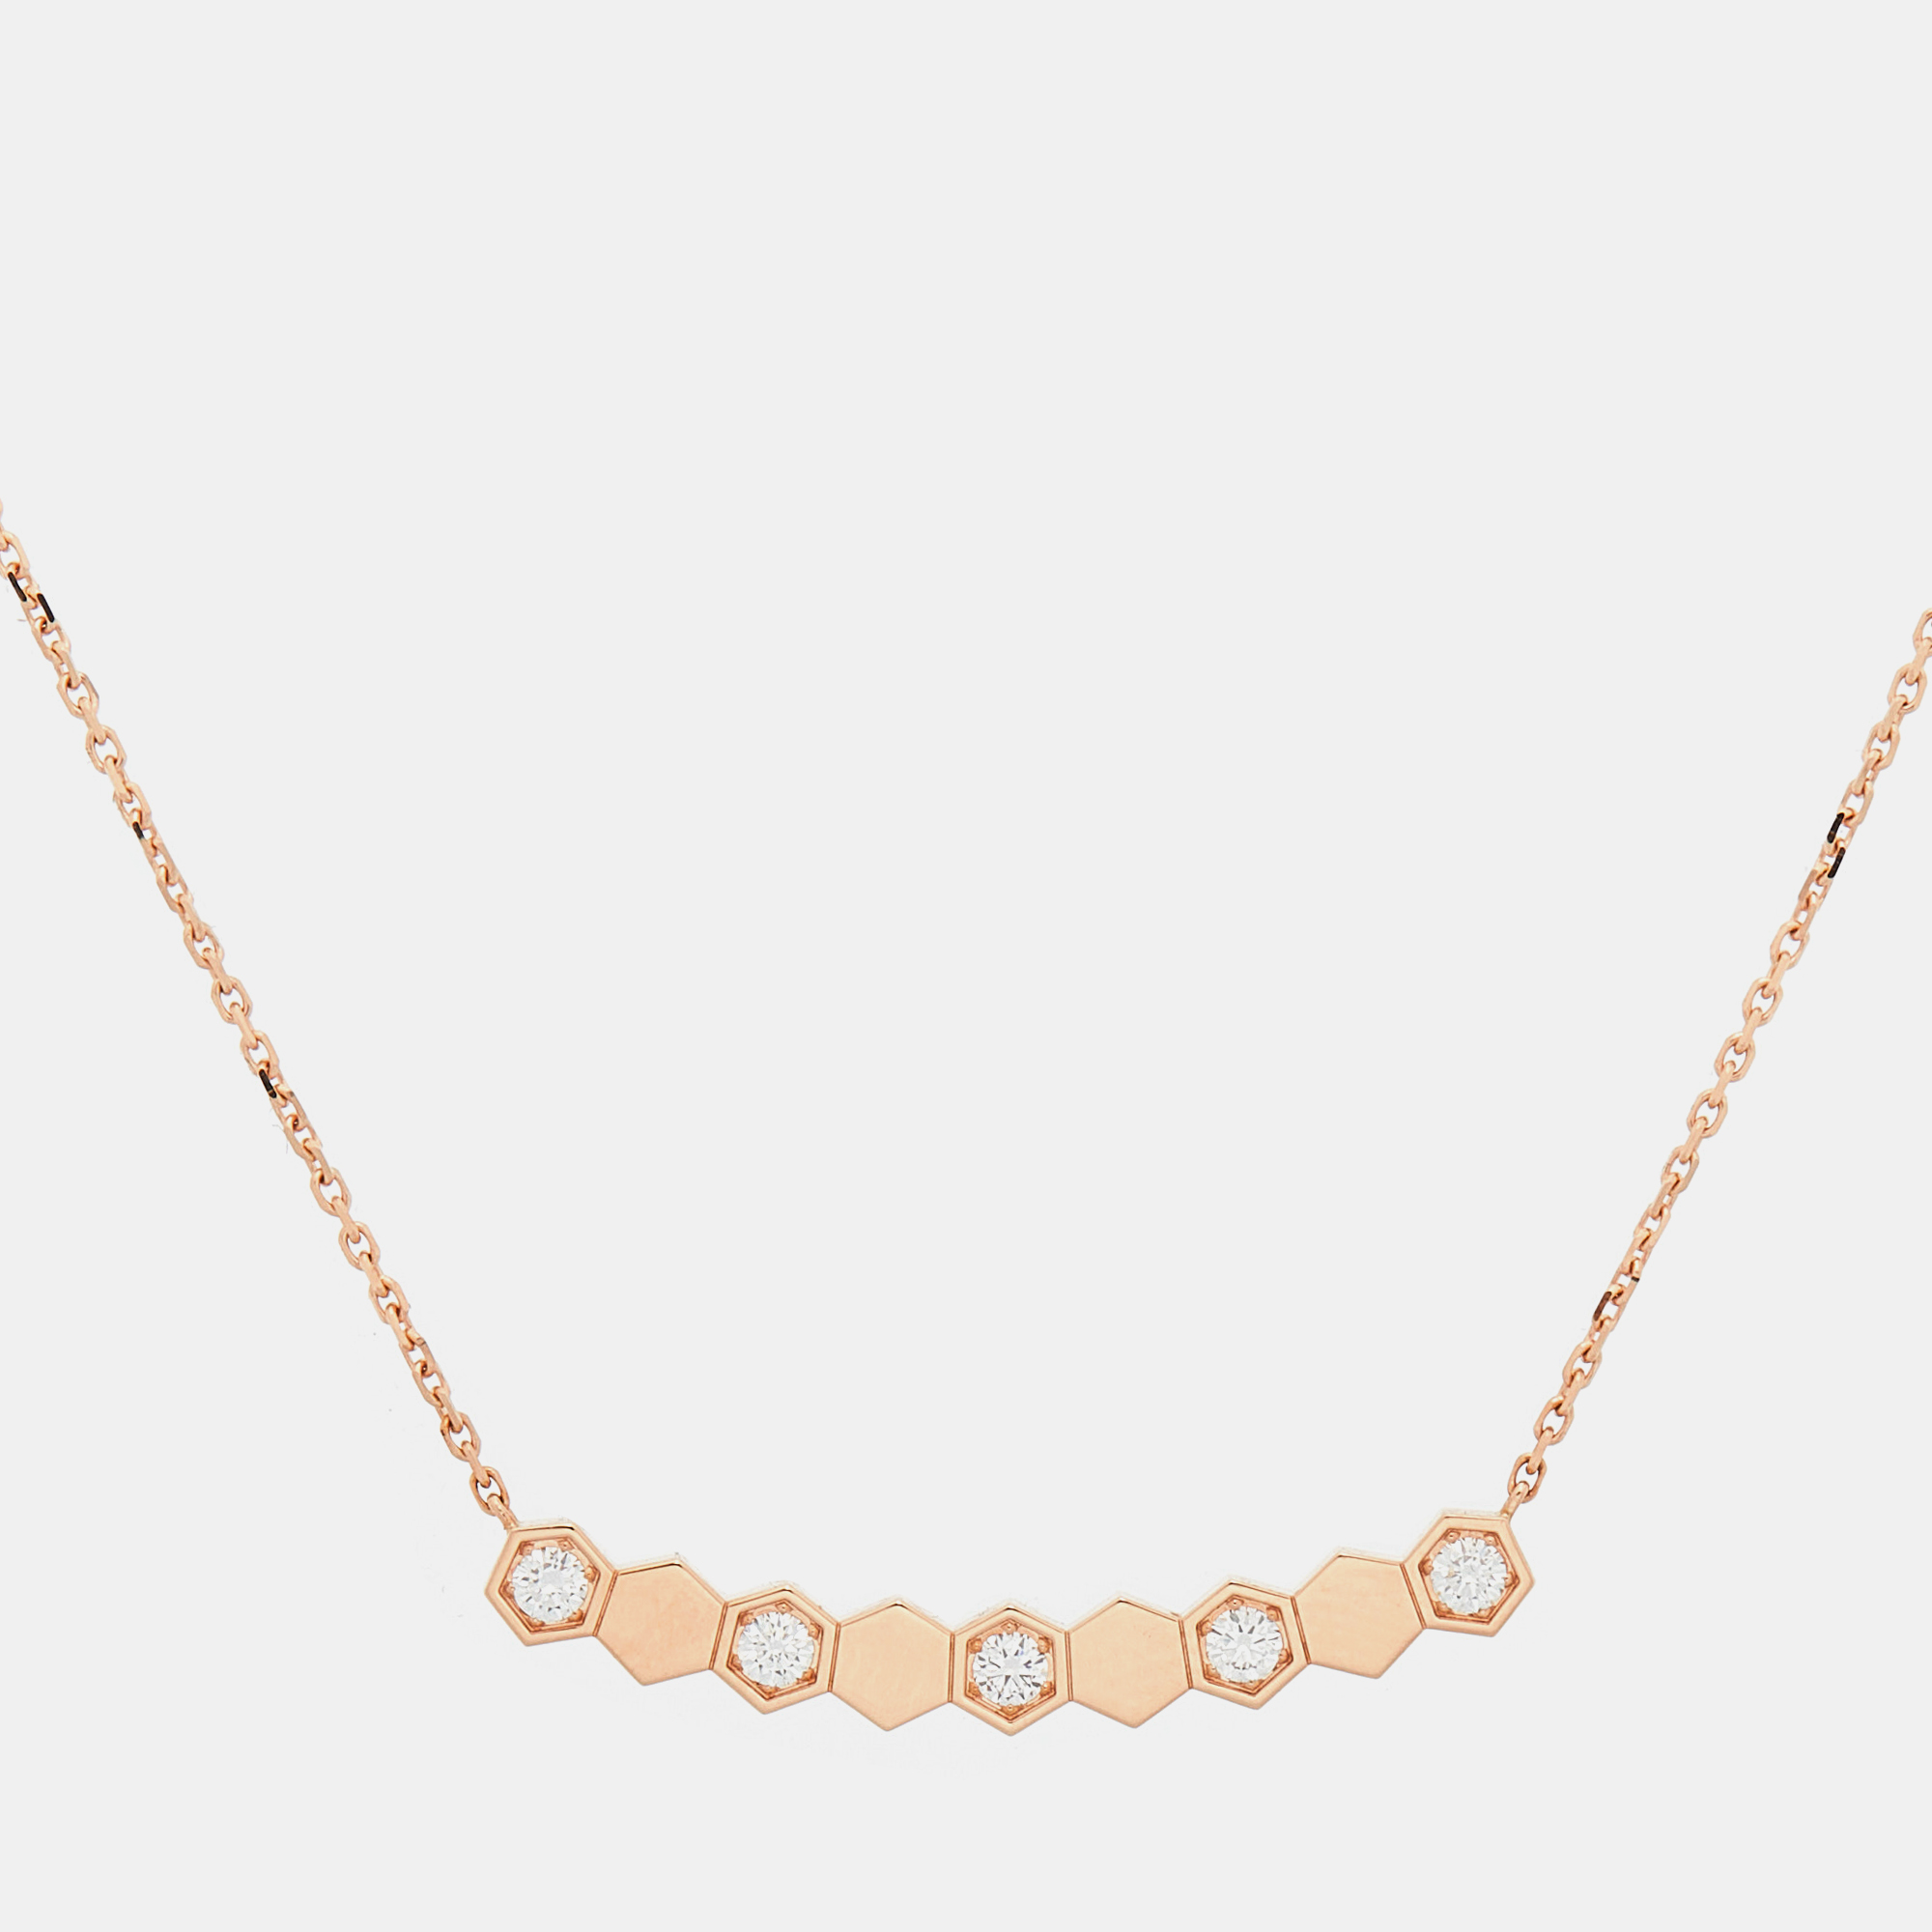 Chaumet bee my love diamond 18k rose gold necklace